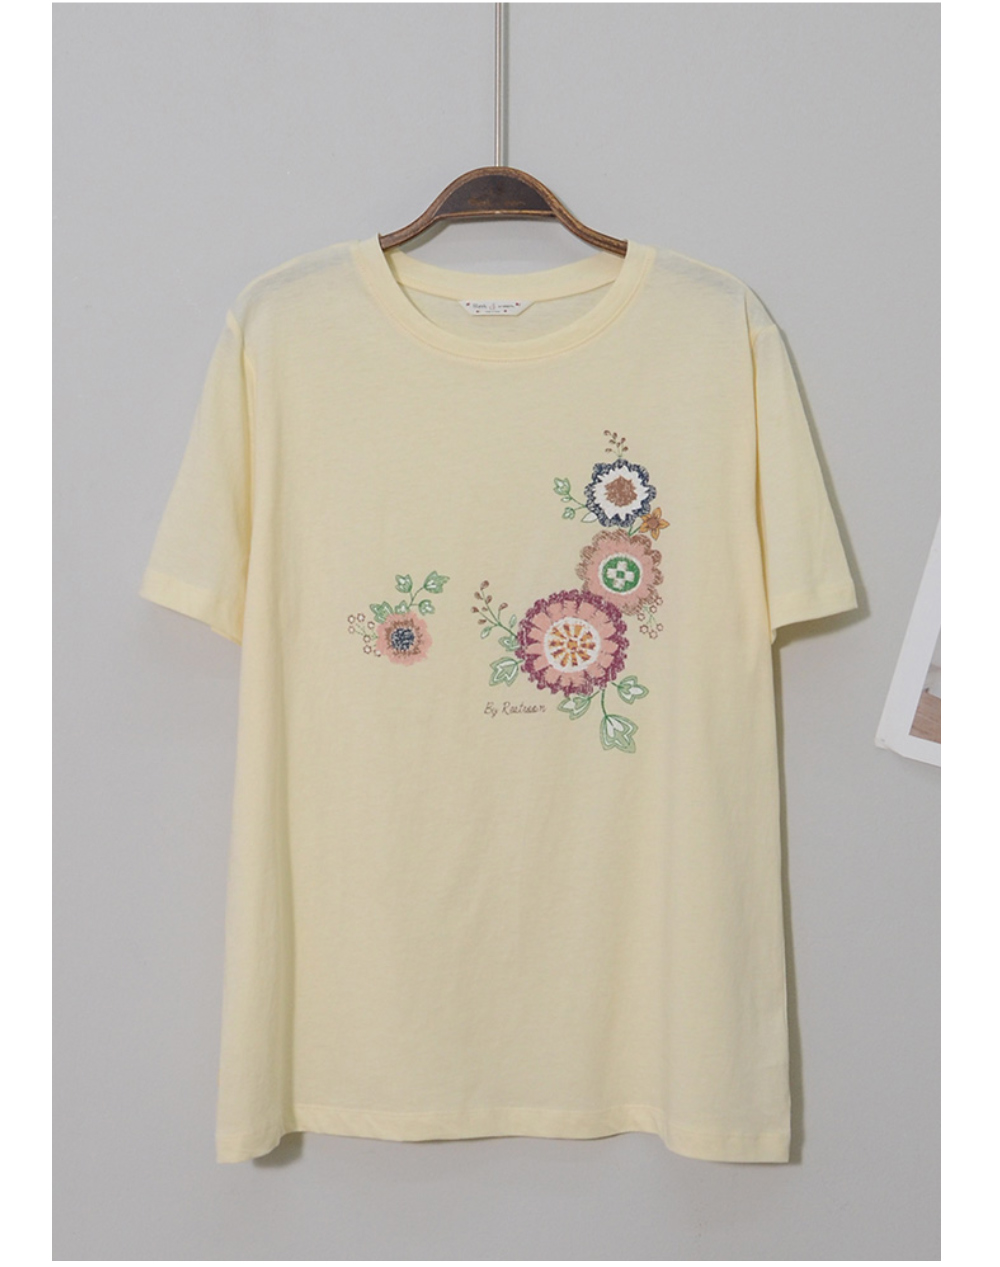 short sleeved tee cream color image-S1L43